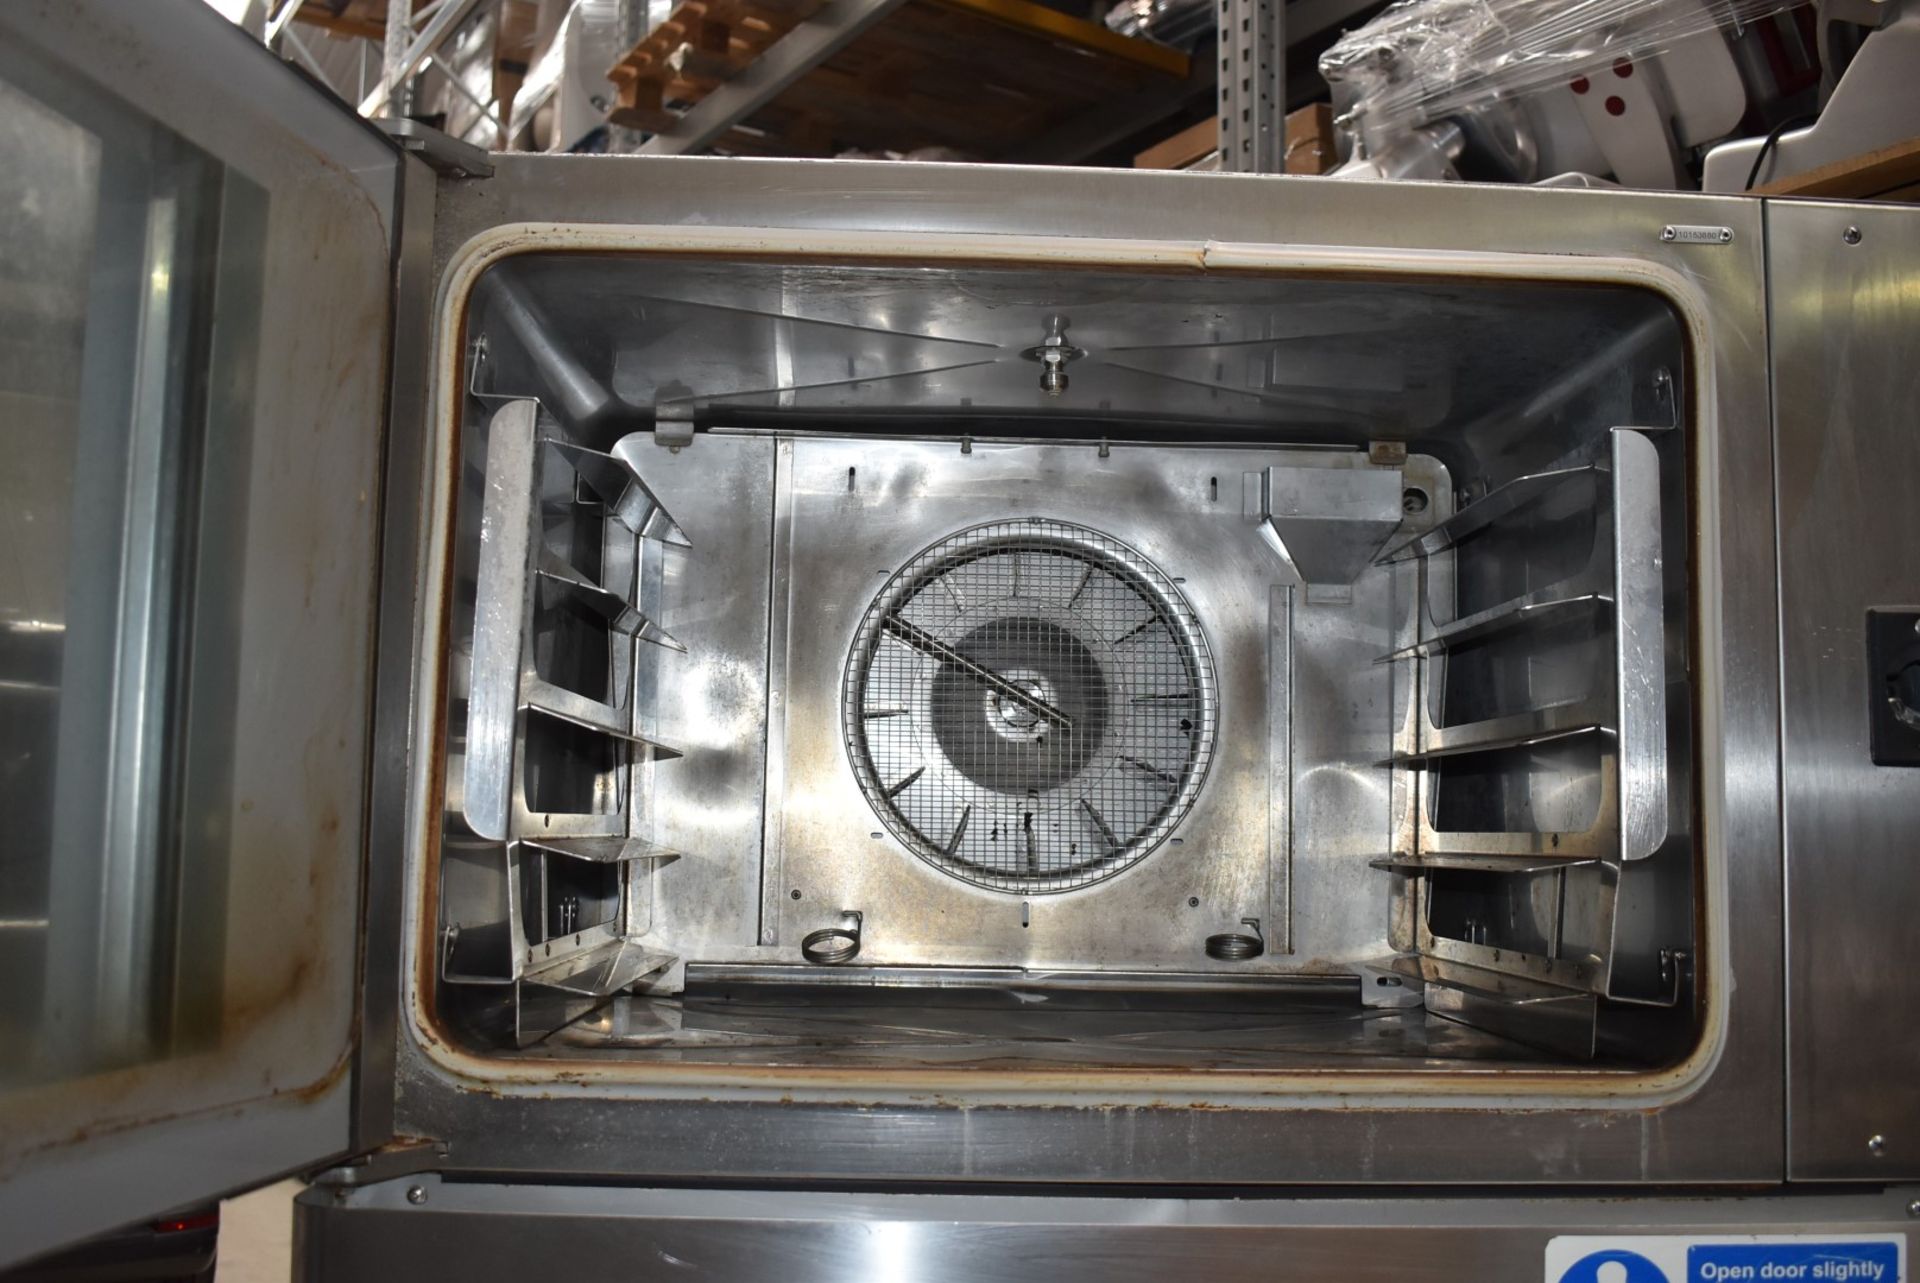 1 x Wiesheu B4-E2 Duo Commercial Convection Oven With Stainless Steel Exterior - Image 4 of 12